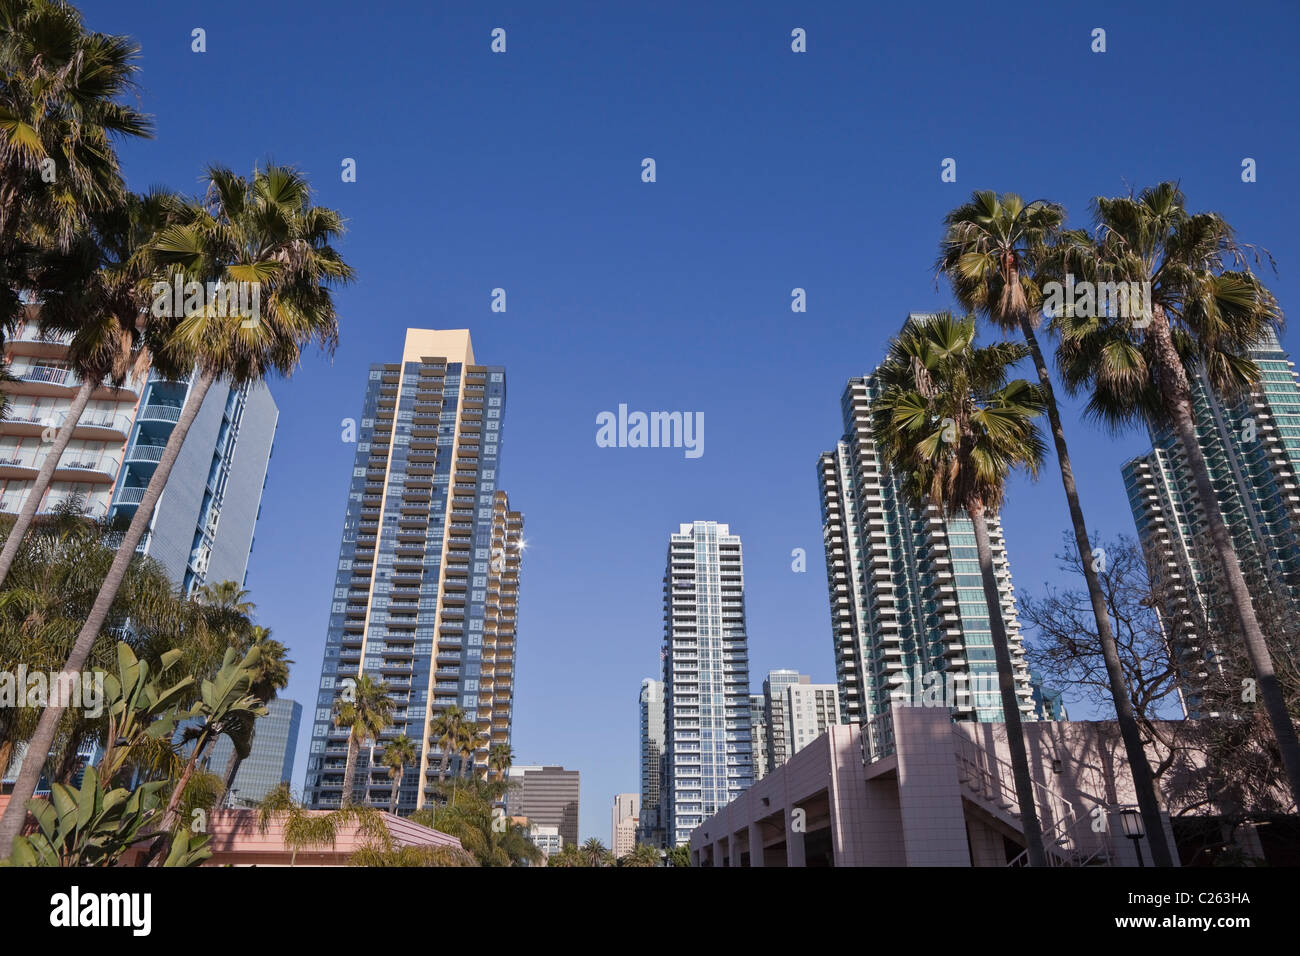 Modern towers and tall palm trees in scenic downtown San Diego California. Stock Photo